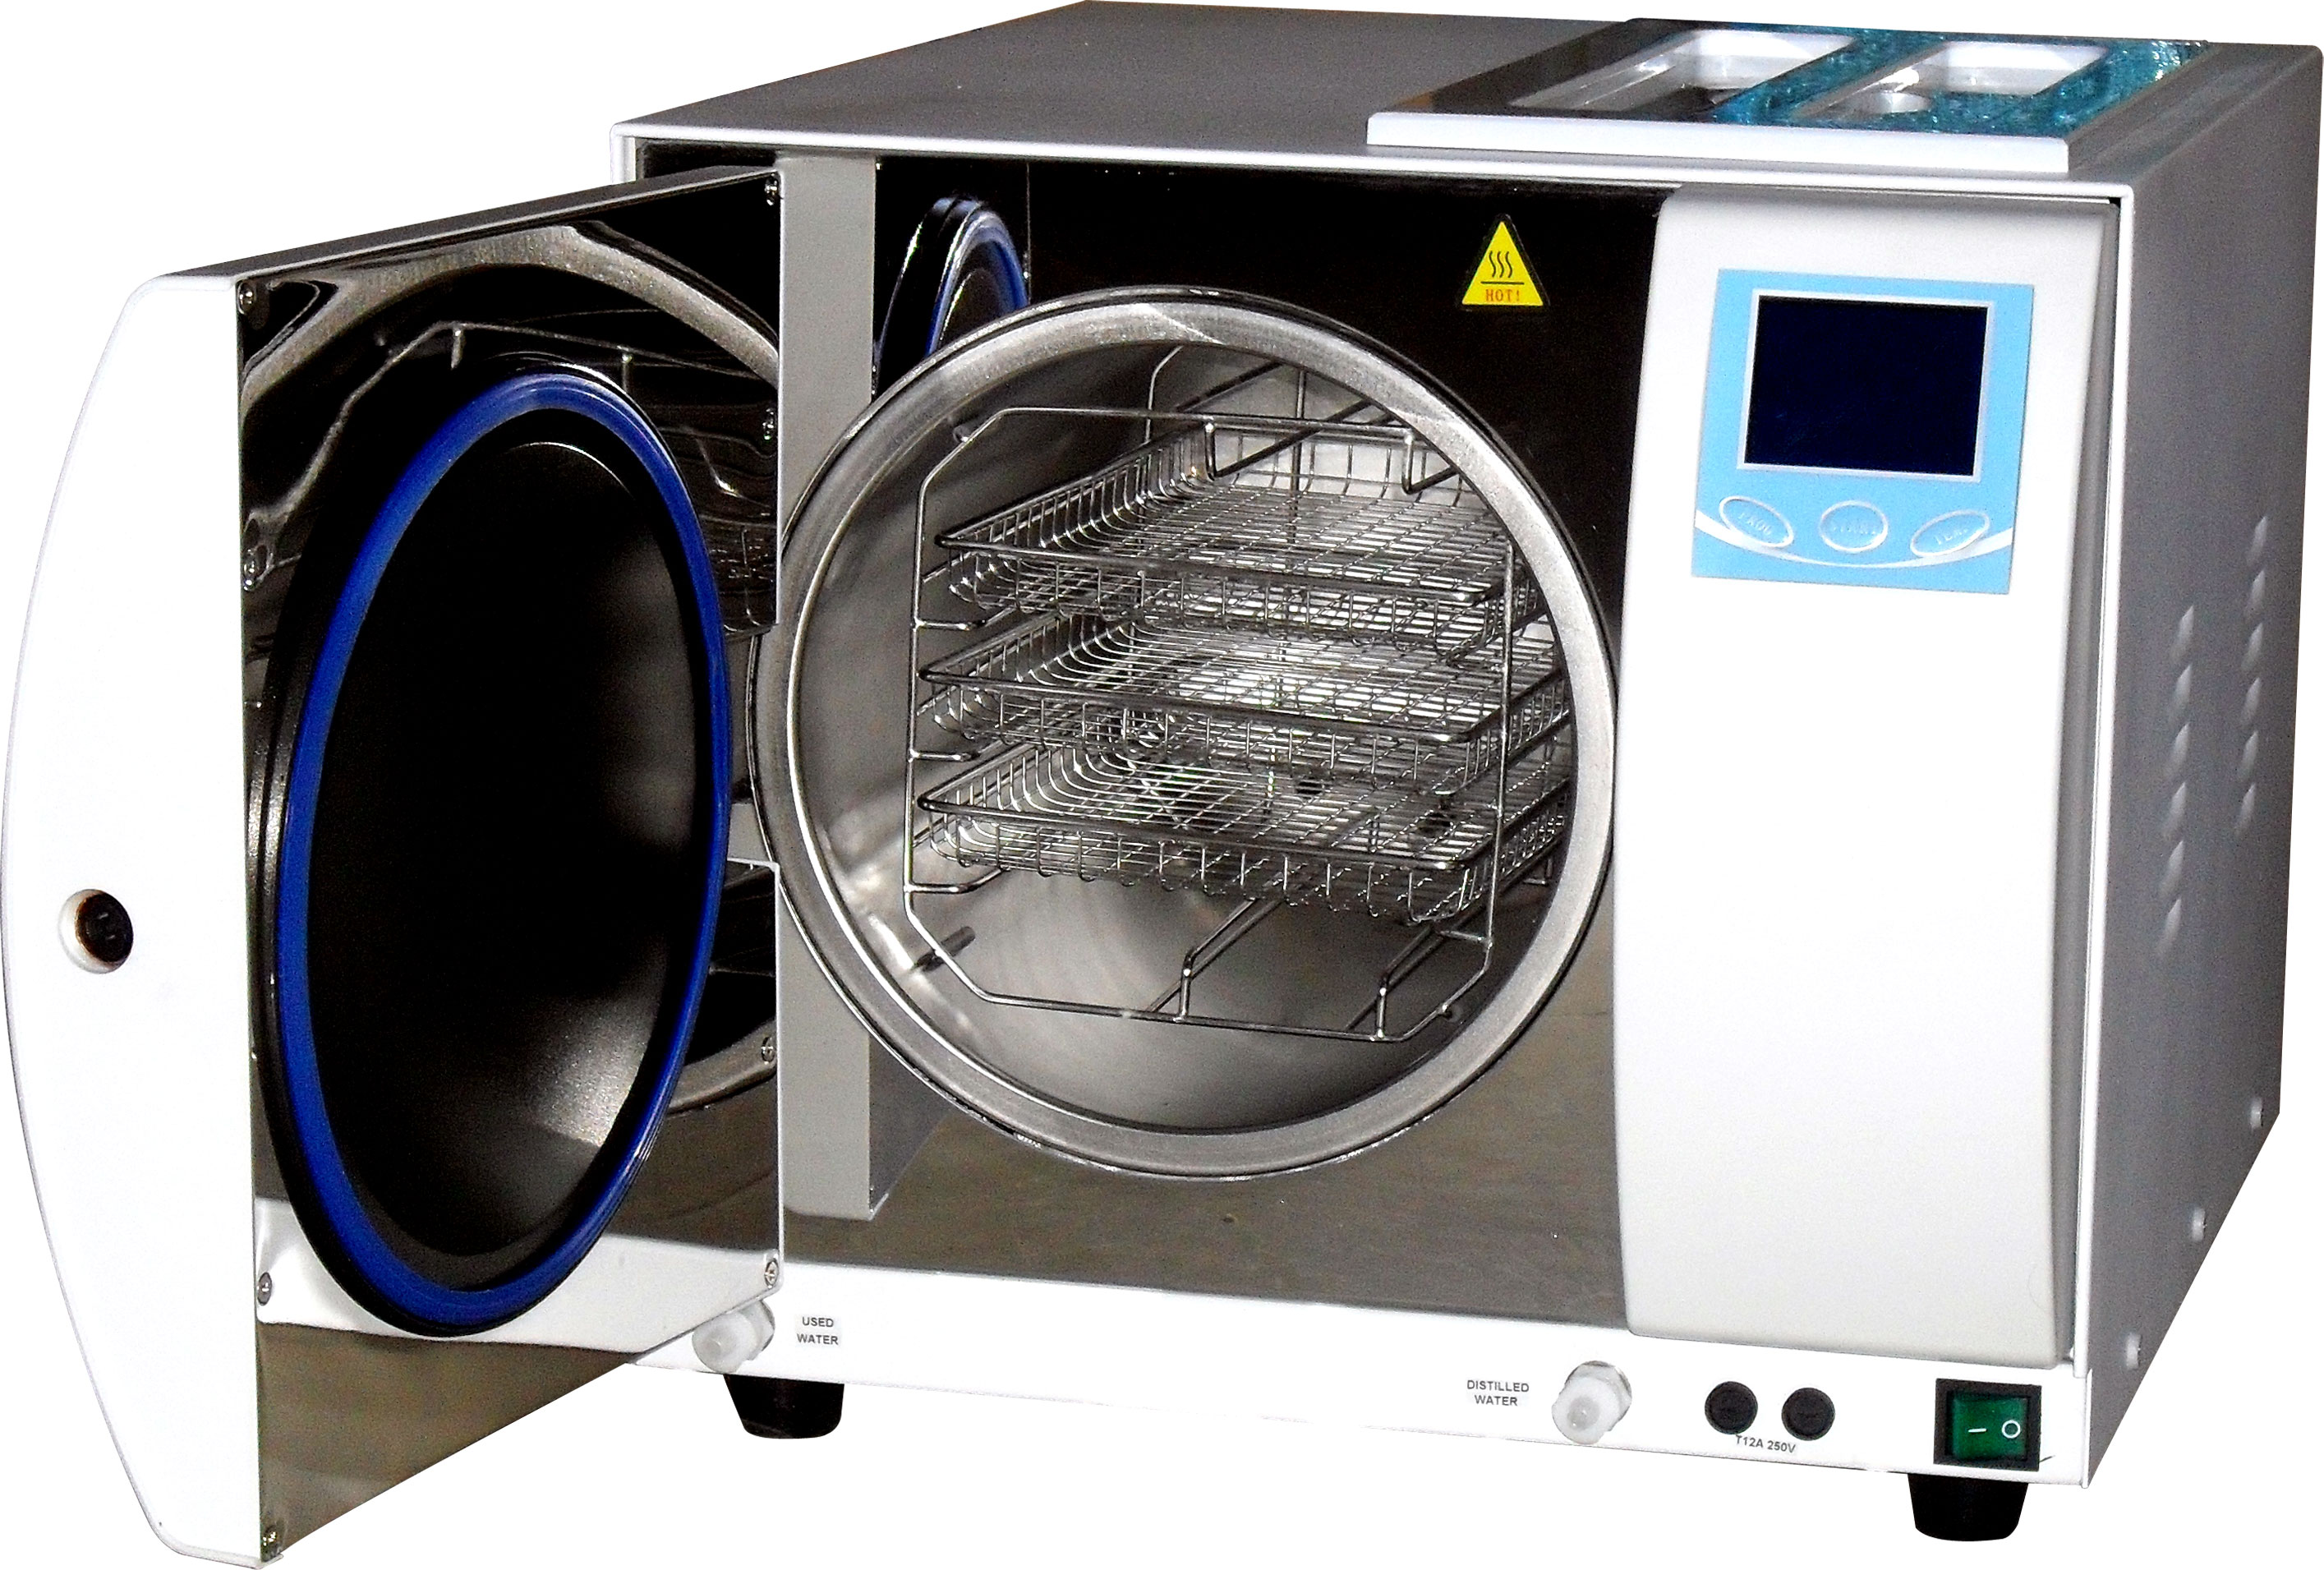 WHAT YOU NEED TO KNOW ABOUT AUTOCLAVE